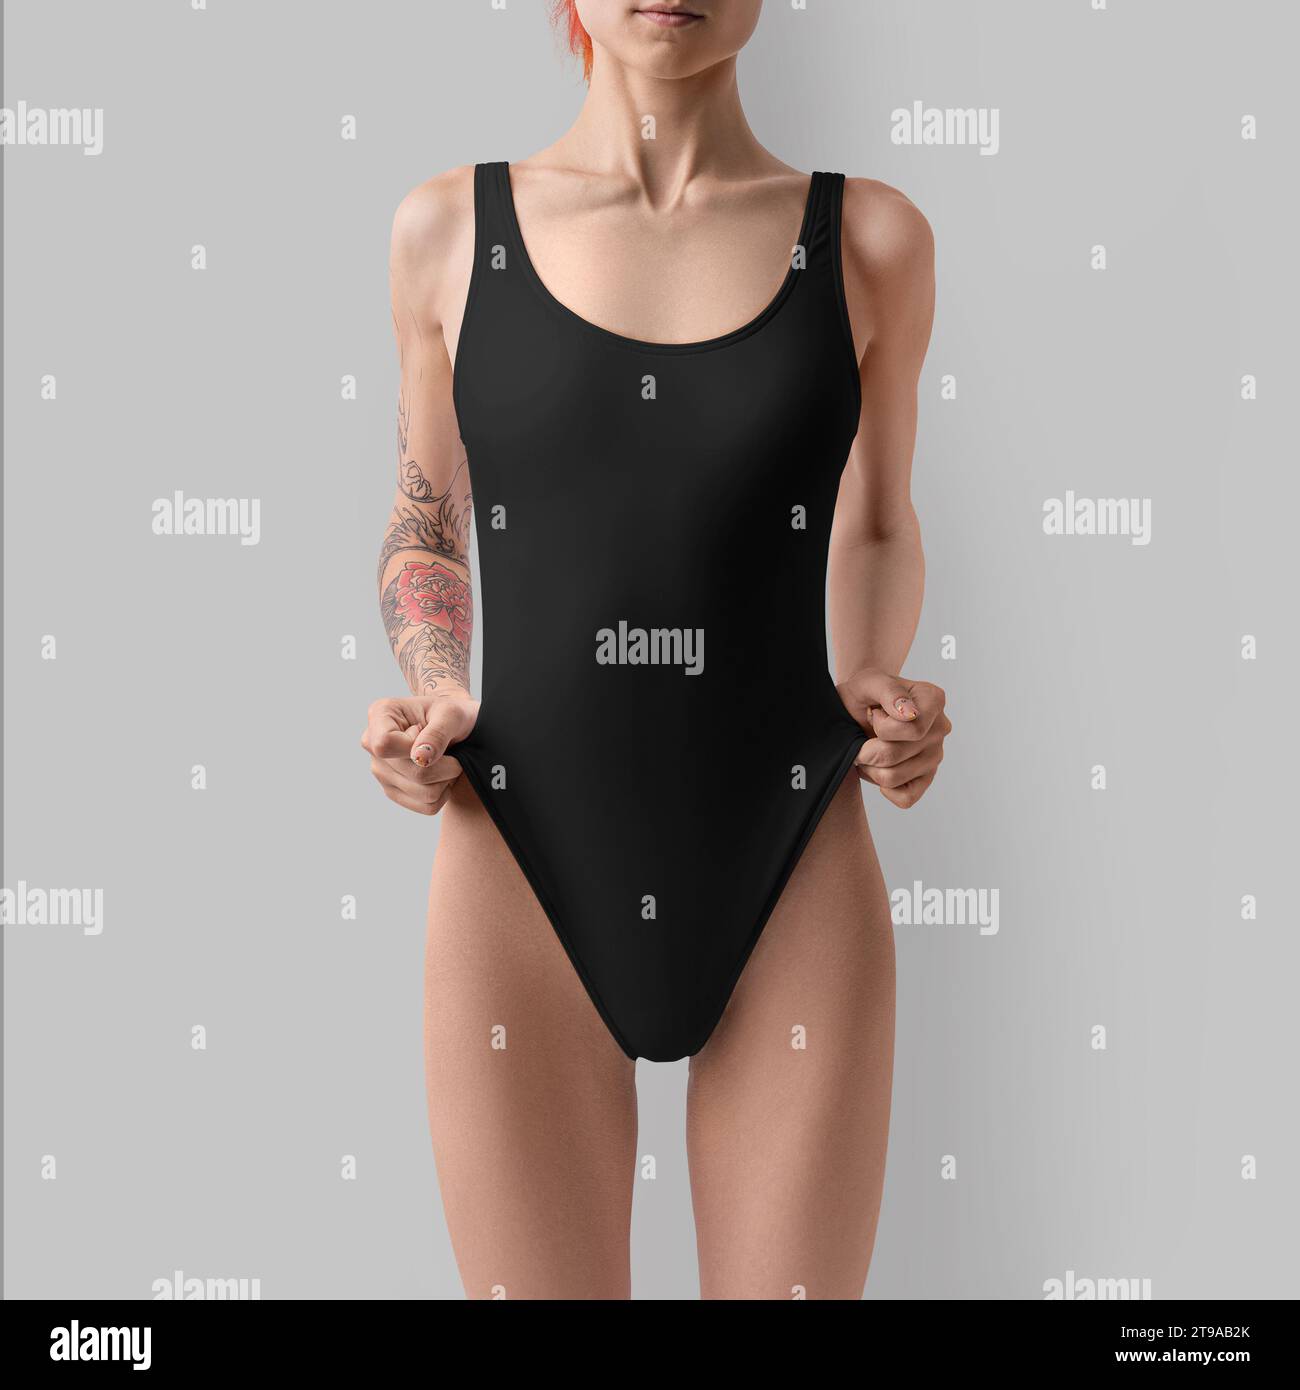 Template of a black sports swimsuit on a girl with a tattoo on her arm, fashionable swimwear for design, branding. Mockup of bodysuits, swimming cloth Stock Photo